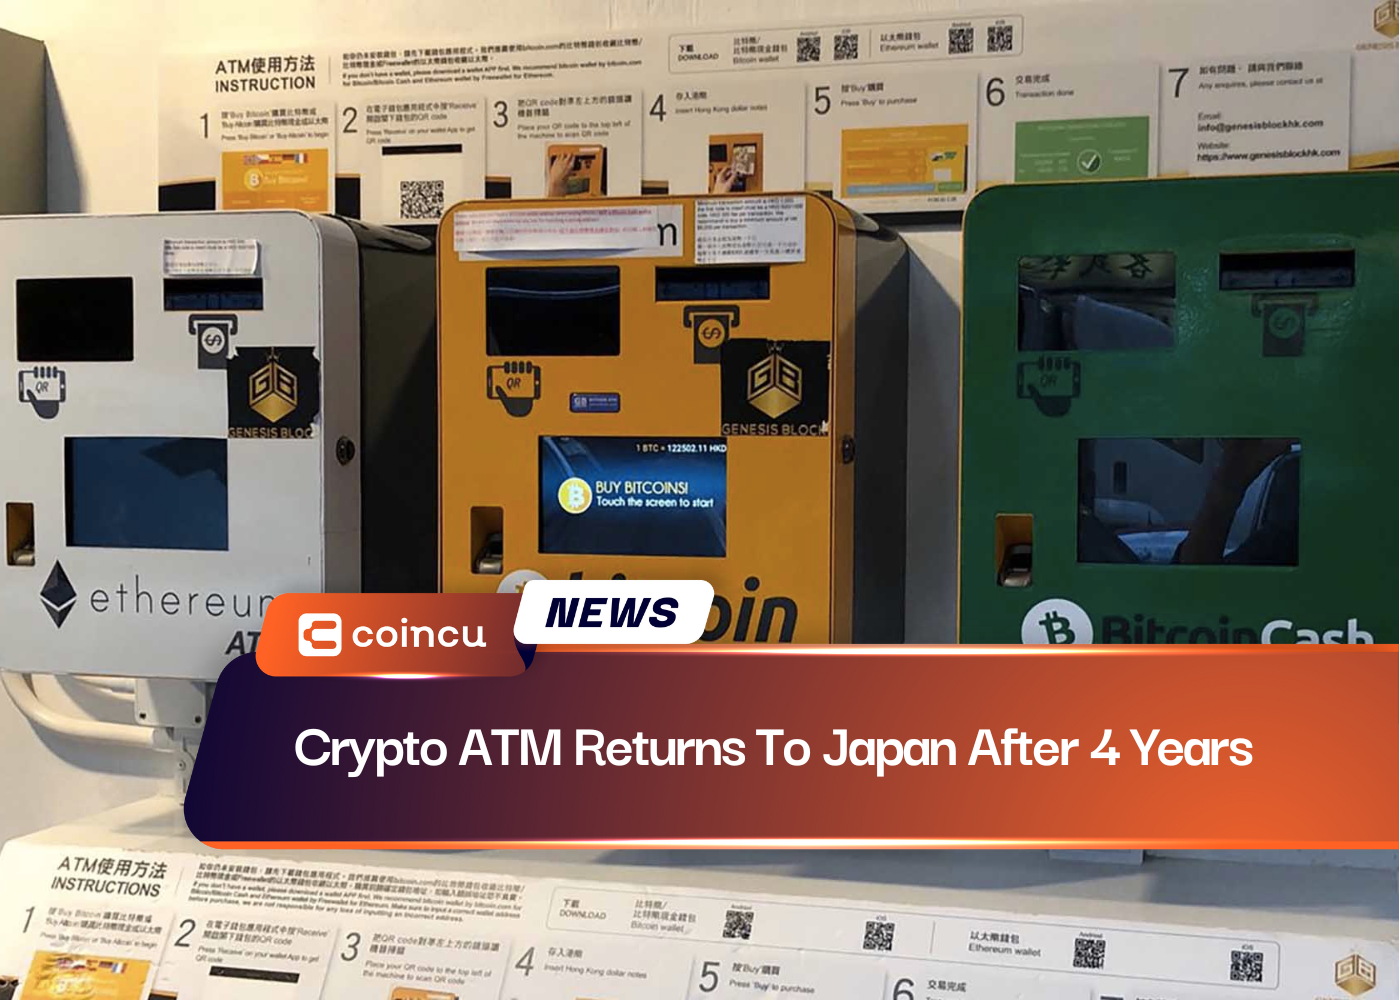 Crypto ATM Returns To Japan After 4 Years